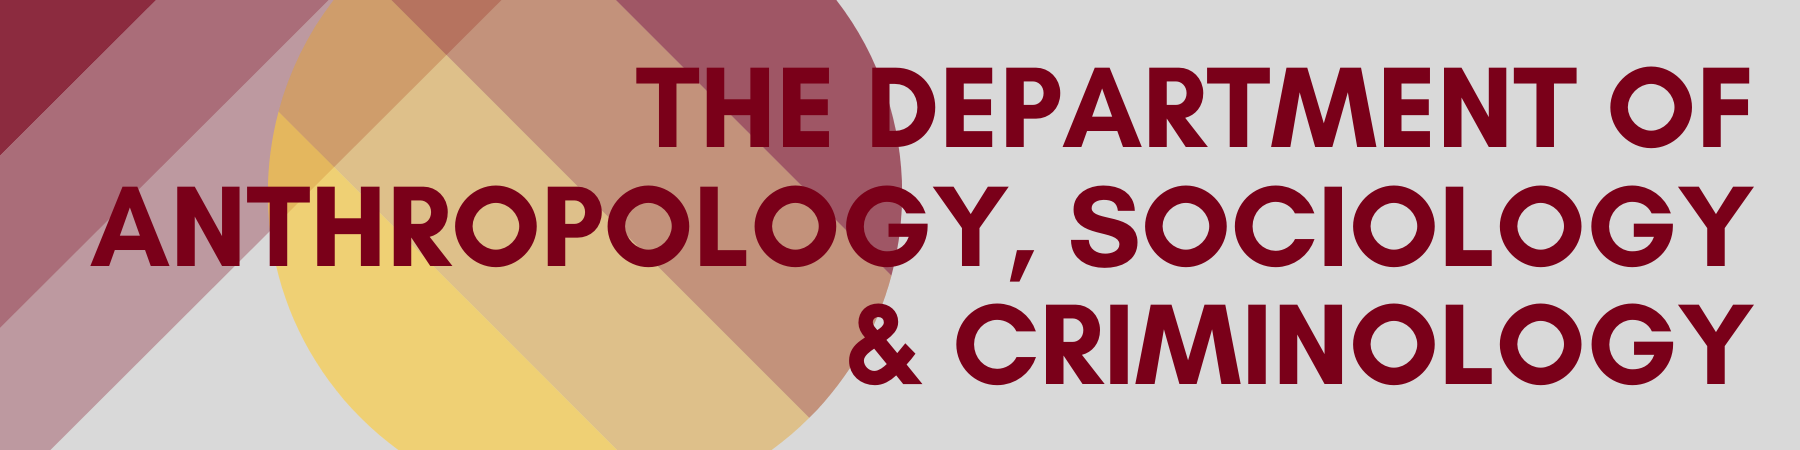 grey backgrouns with maroon and gold circle and text Department of Anthropology, Sociology & Criminology